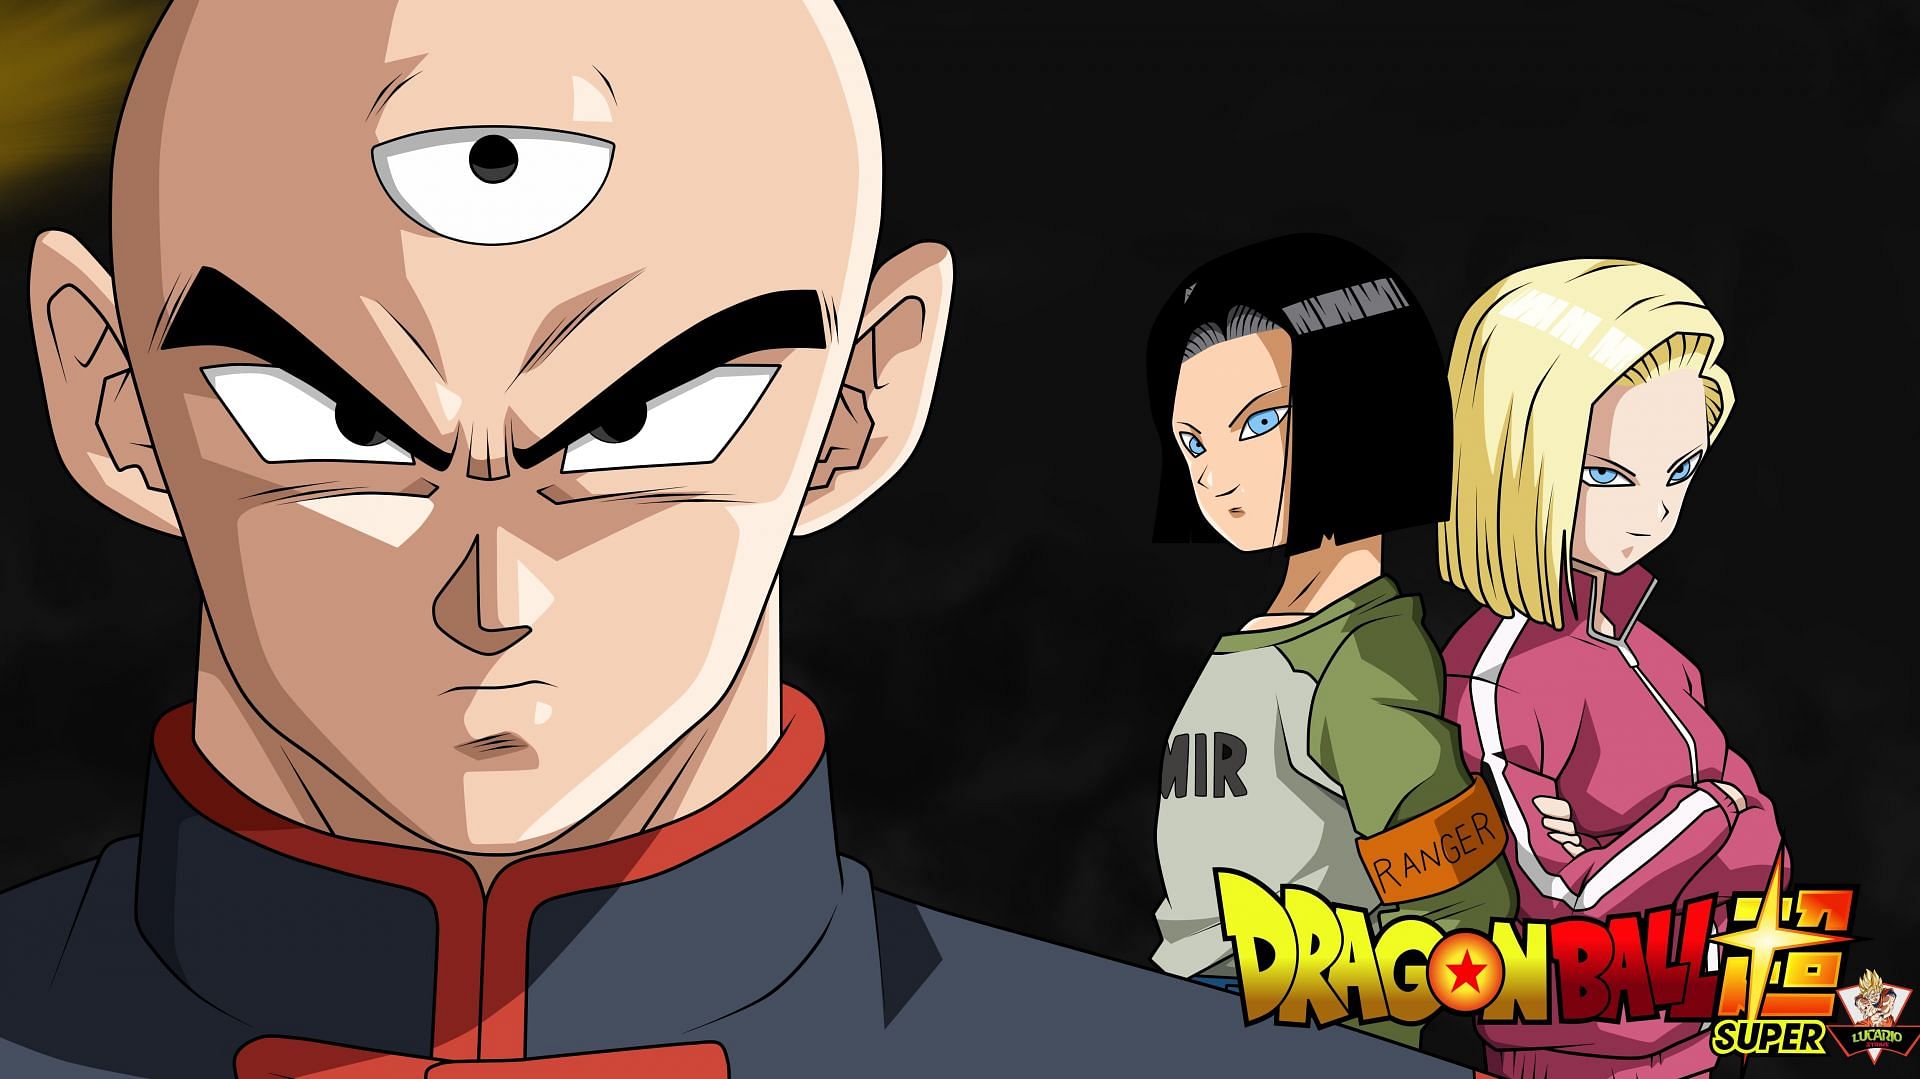 Tien as seen in Dragon Ball Super along with Adroid 16 &amp; 17 (Image via Toei Animation)